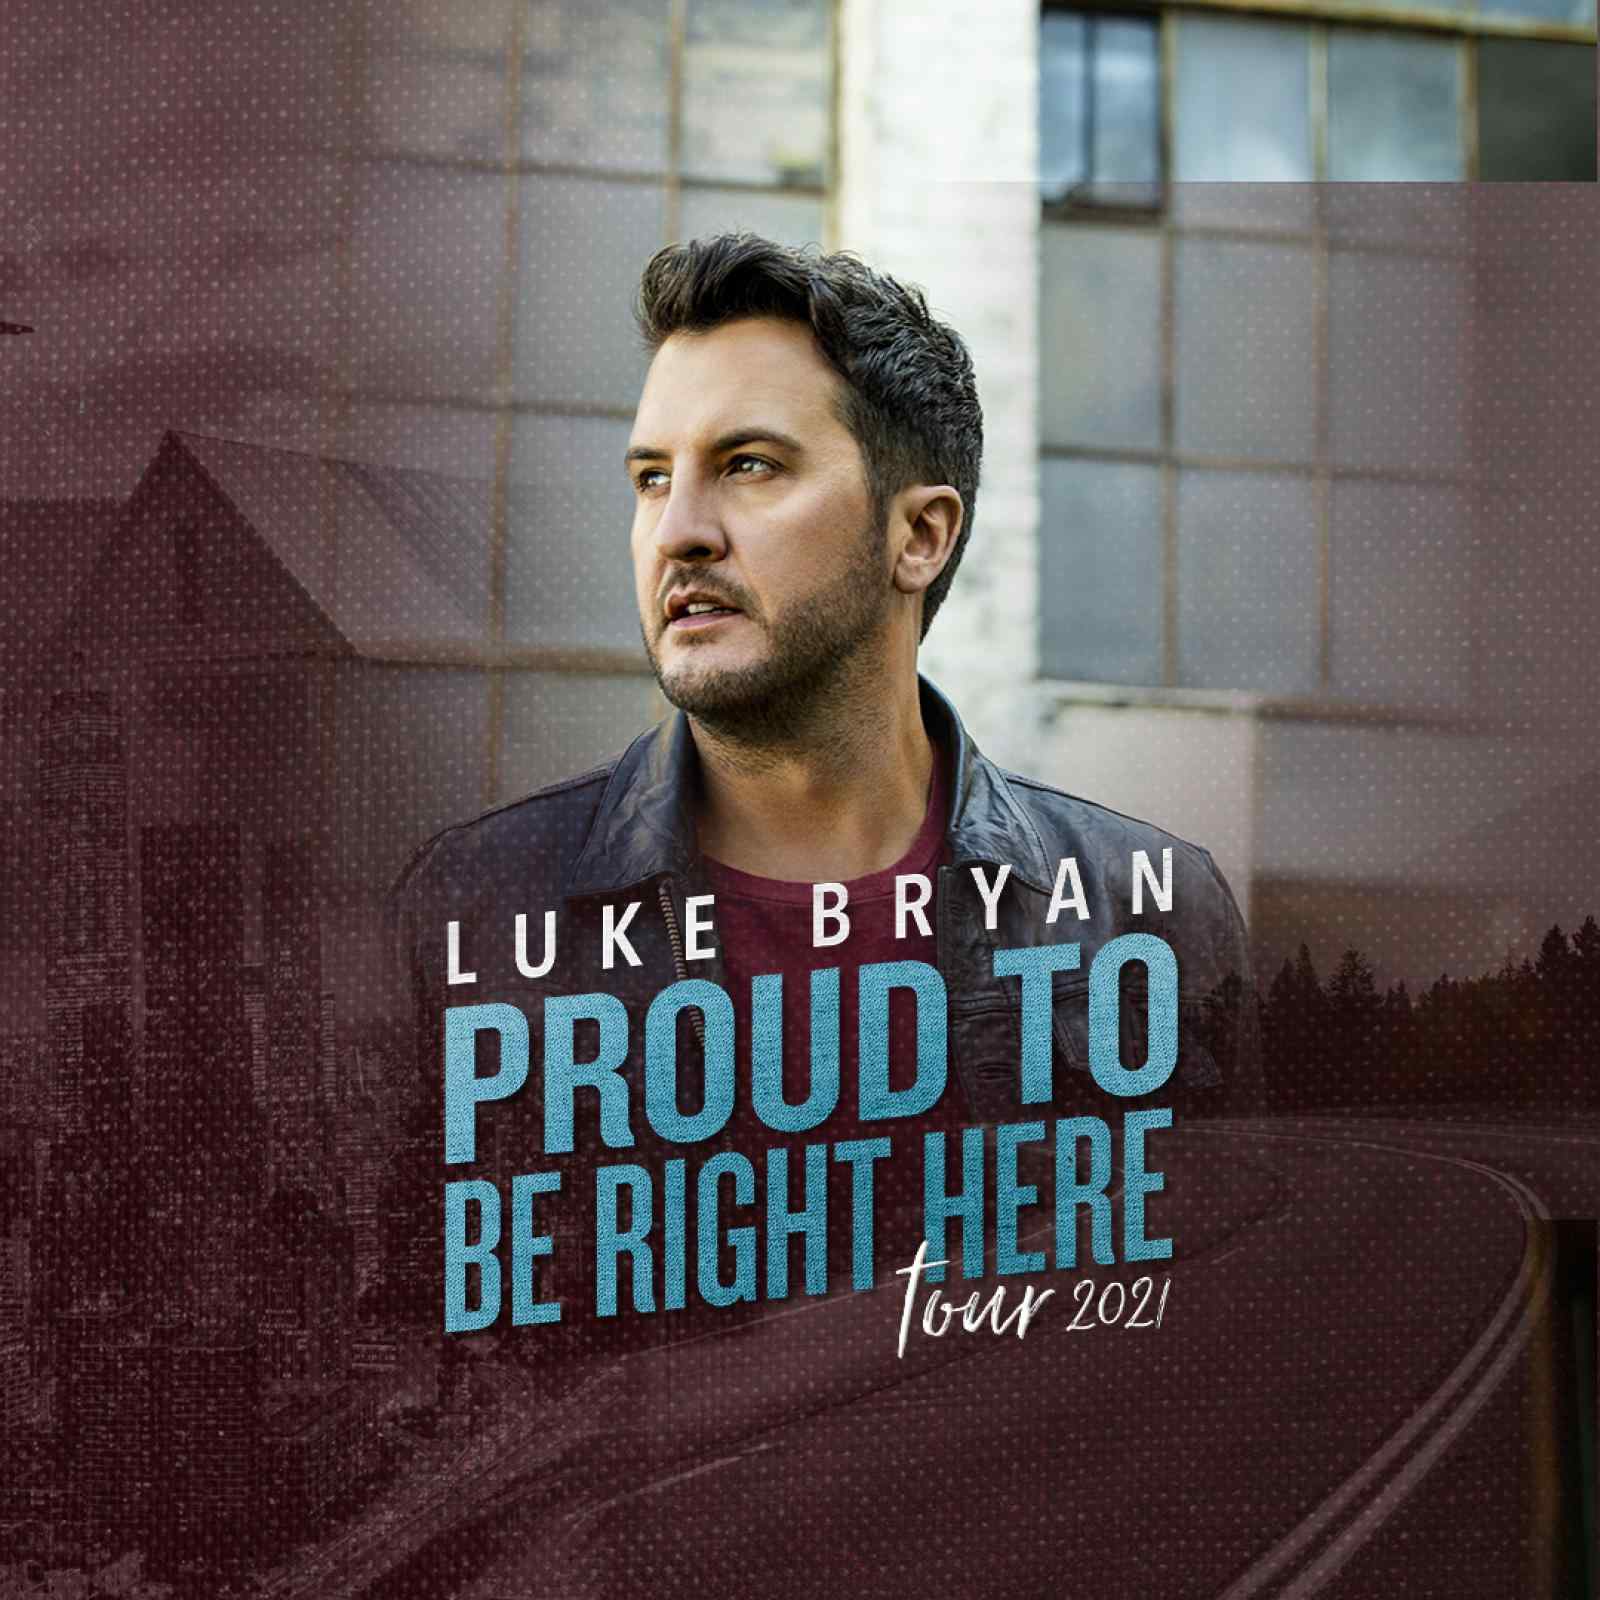 LUKE BRYAN RESCHEDULES PROUD TO BE RIGHT HERE TOUR CALENDAR TO 2021